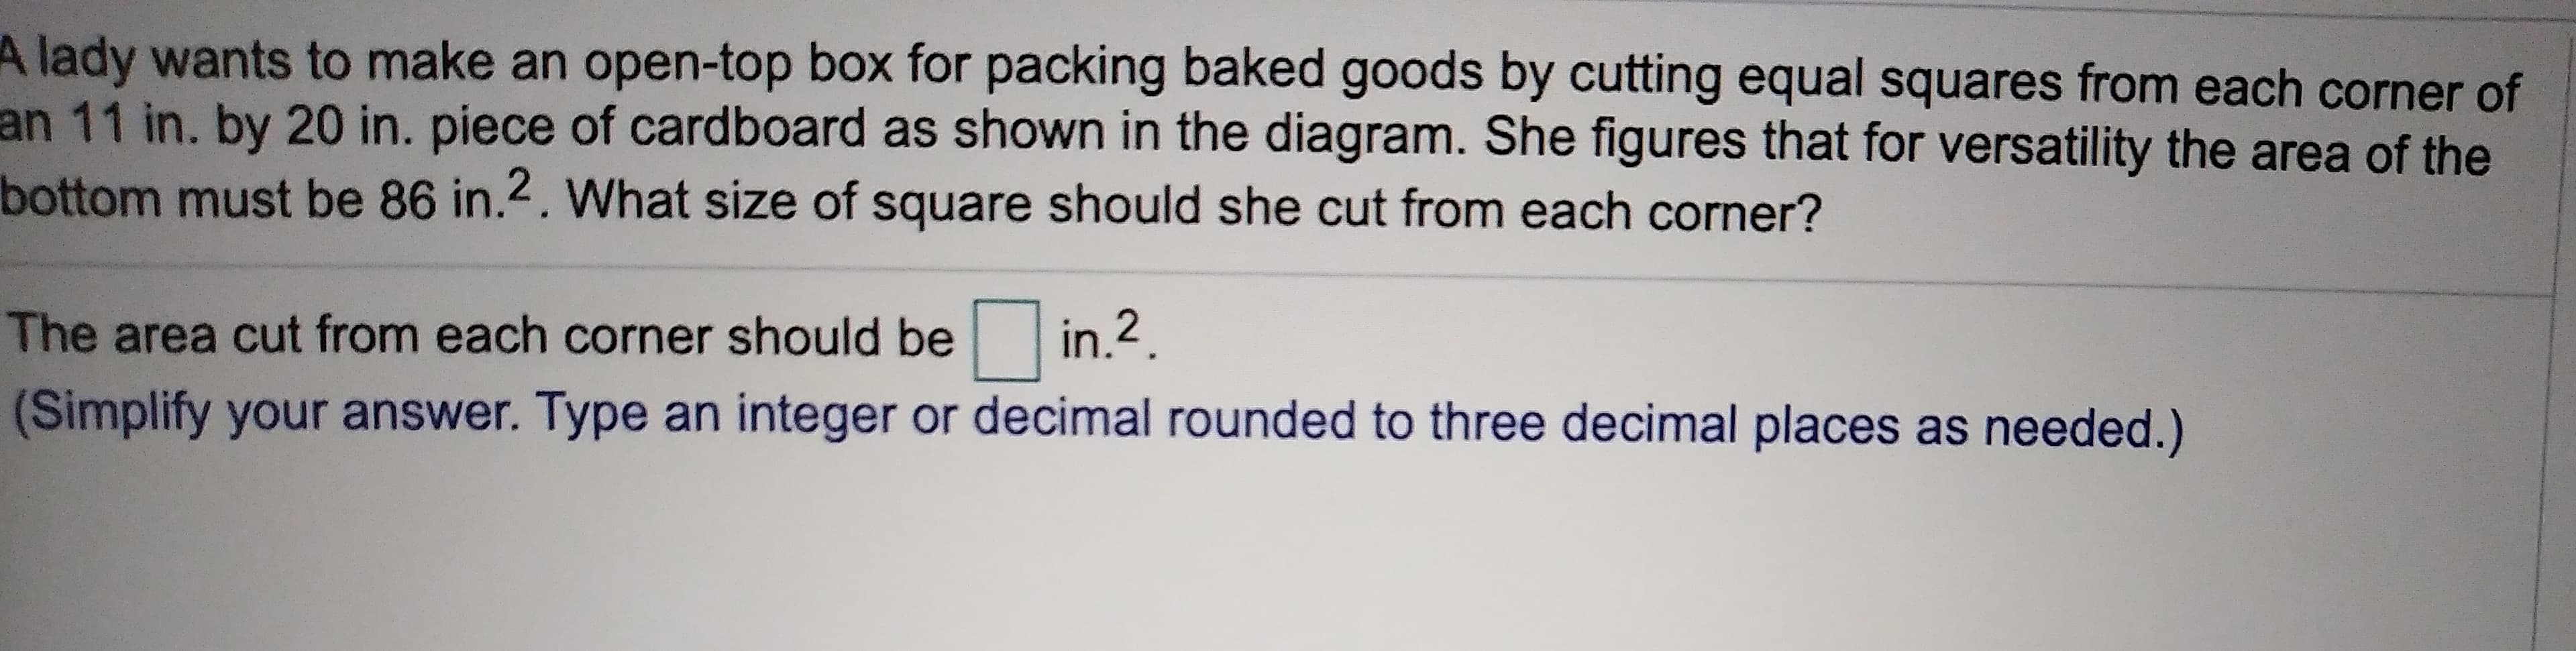 lady wants to make an open-top box for packing baked goods by cutting equal squares from each corner of
an 11 in. by 20 in. piece of cardboard as shown in the diagram. She figures that for versatility the area of the
bottom must be 86 in.2. What size of square should she cut from each corner?
in.2
The area cut from each corner should be
(Simplify your answer. Type an integer or decimal rounded to three decimal places as needed.)
